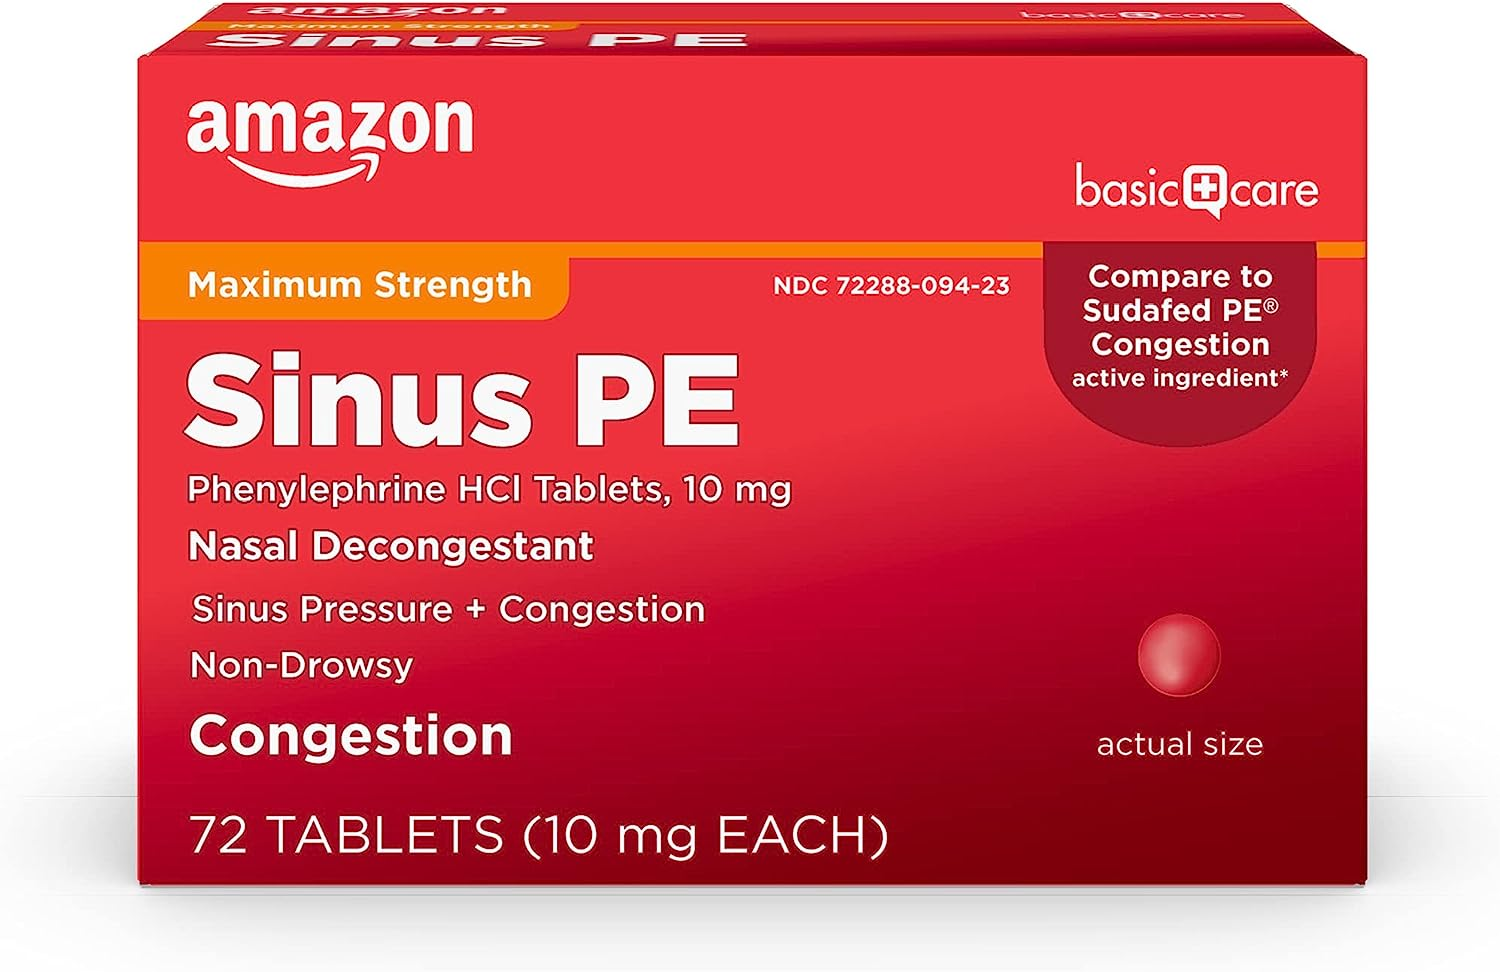 Amazon Basic Care Maximum Strength Nasal Decongestant PE, Phenylephrine HCl, 10 mg Tablets. Nasal and Sinus Congestion, Sinus Pressure, 72 Count : Health & Household $4.24